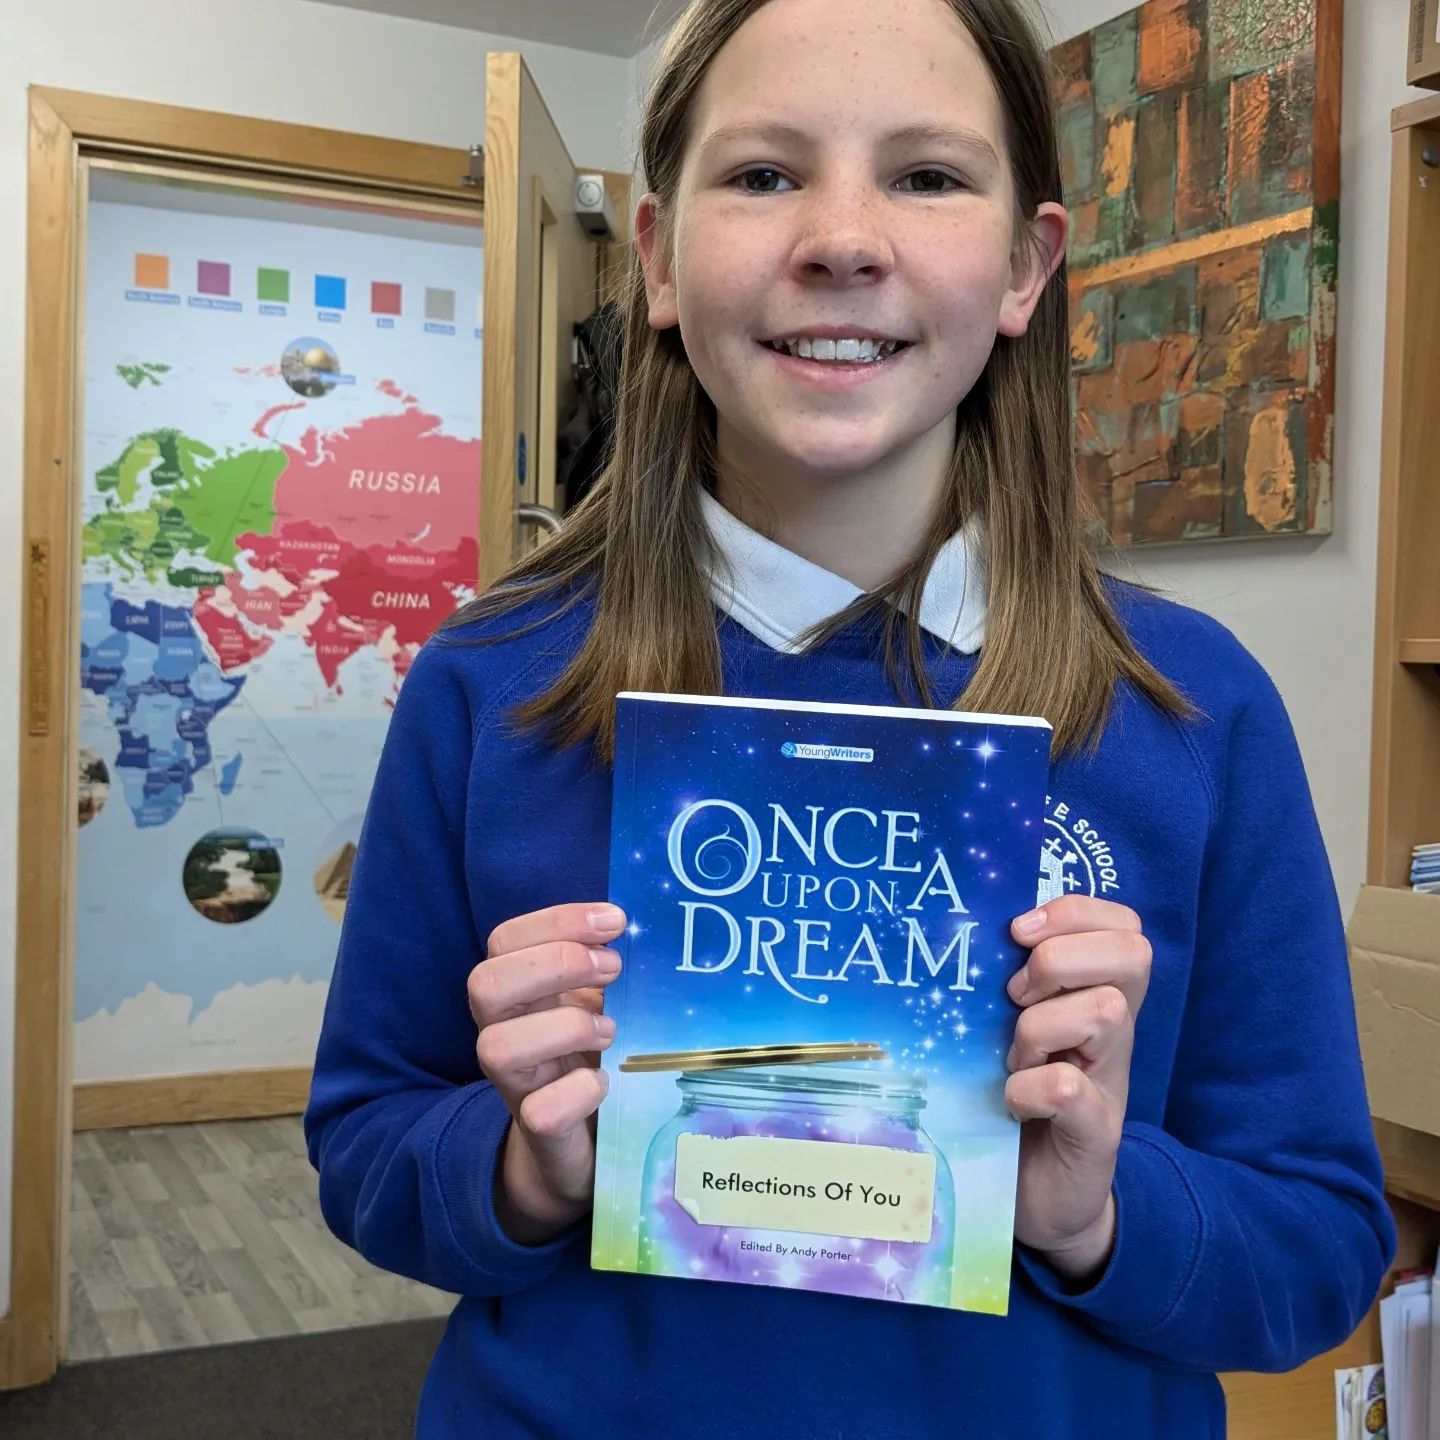 It was wonderful to discover that Ania's poem has been published along with other young poets. CONGRATULATIONS we are very proud of you! #poet #poem #author #poetry #create